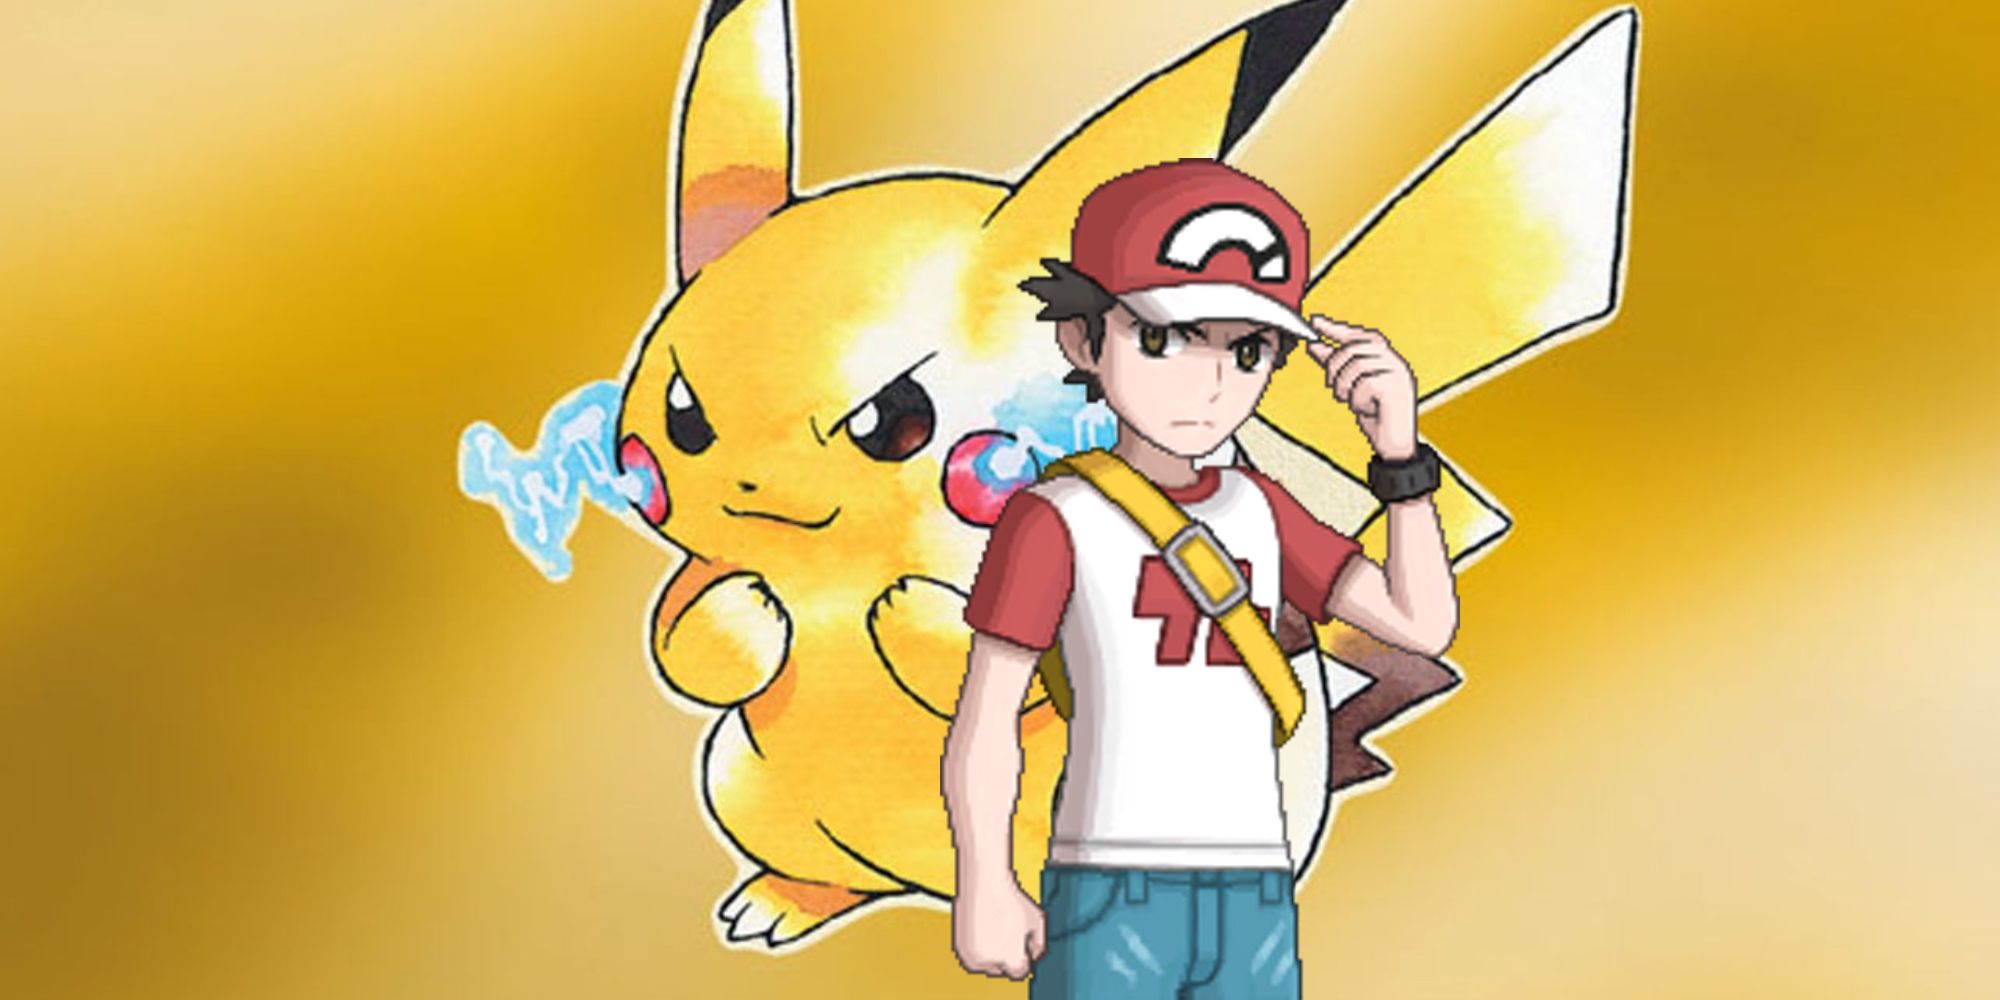 Red standing in front of the Pikachu artwork from Pokémon Yellow.